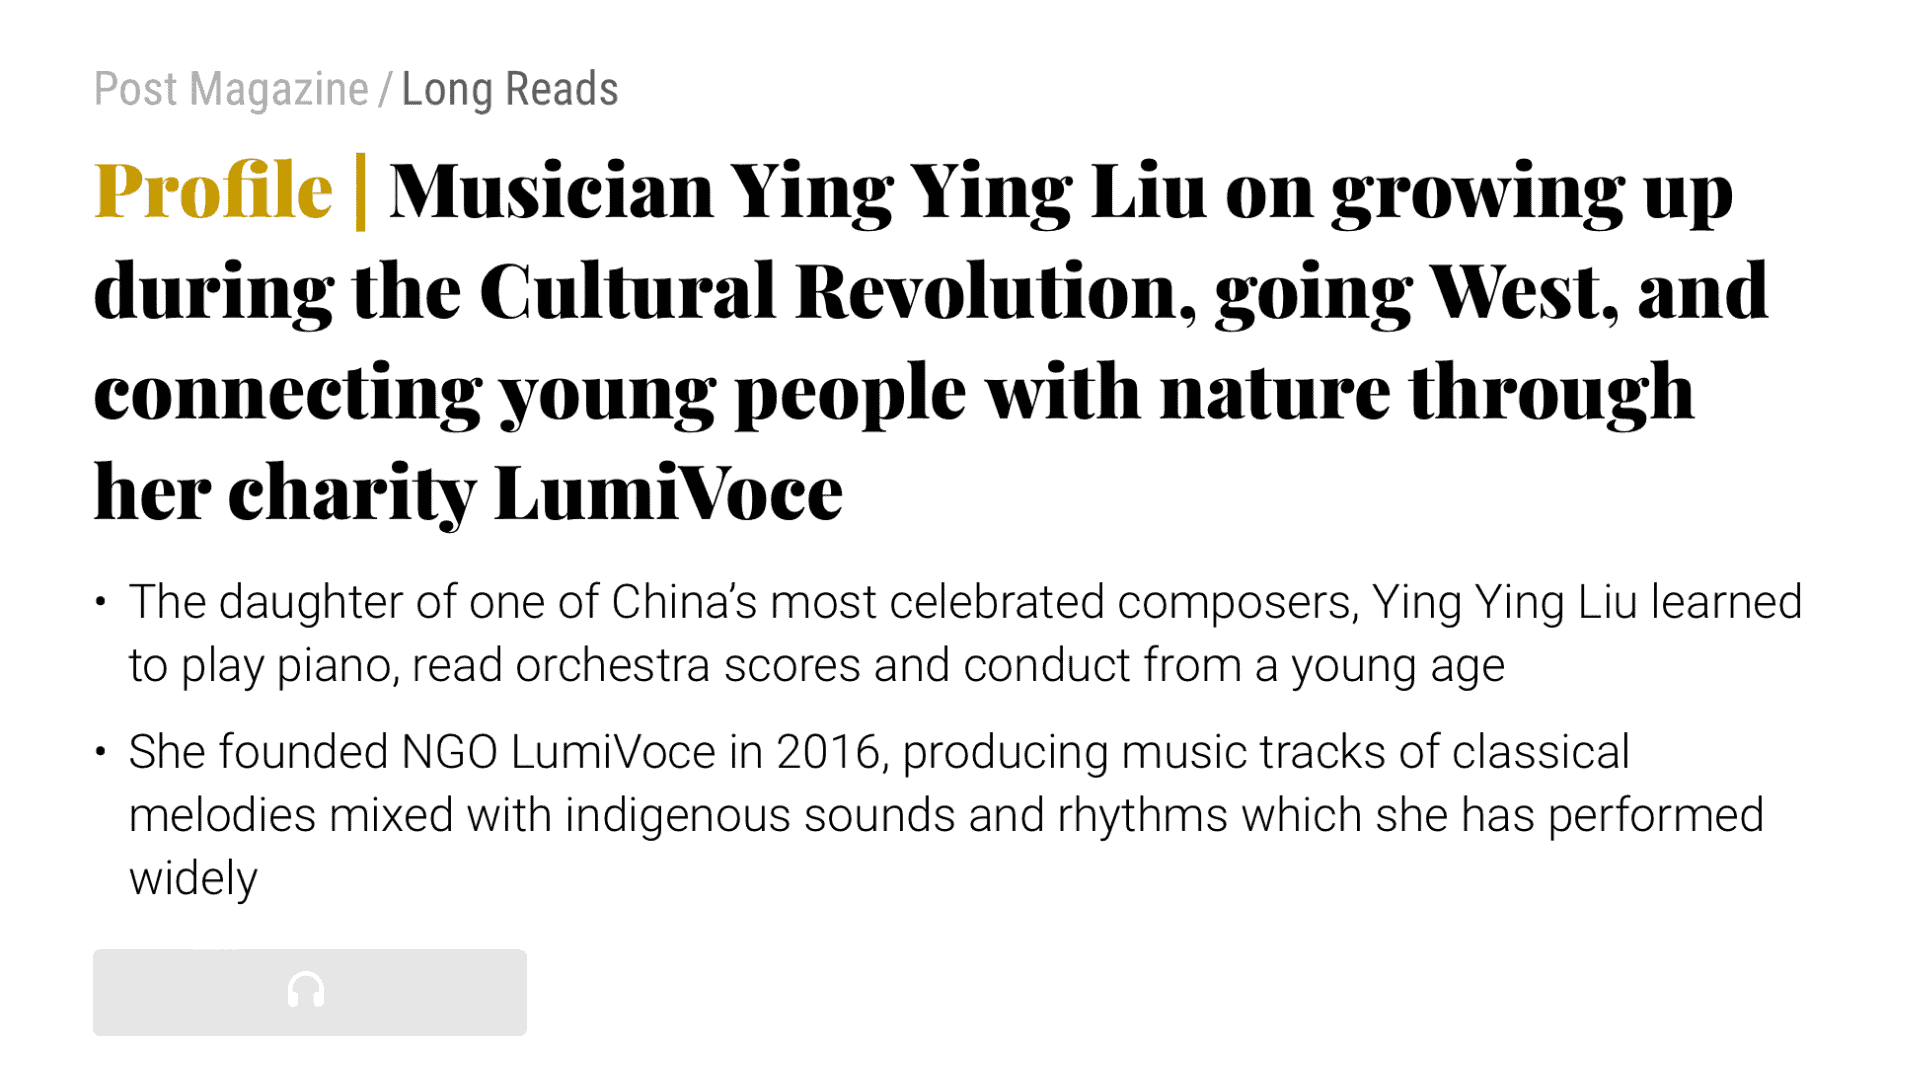 SCMP-Musician Ying Ying Liu on growing up during the Cultural Revolution, going West, and connecting young people with nature through her charity LumiVoce